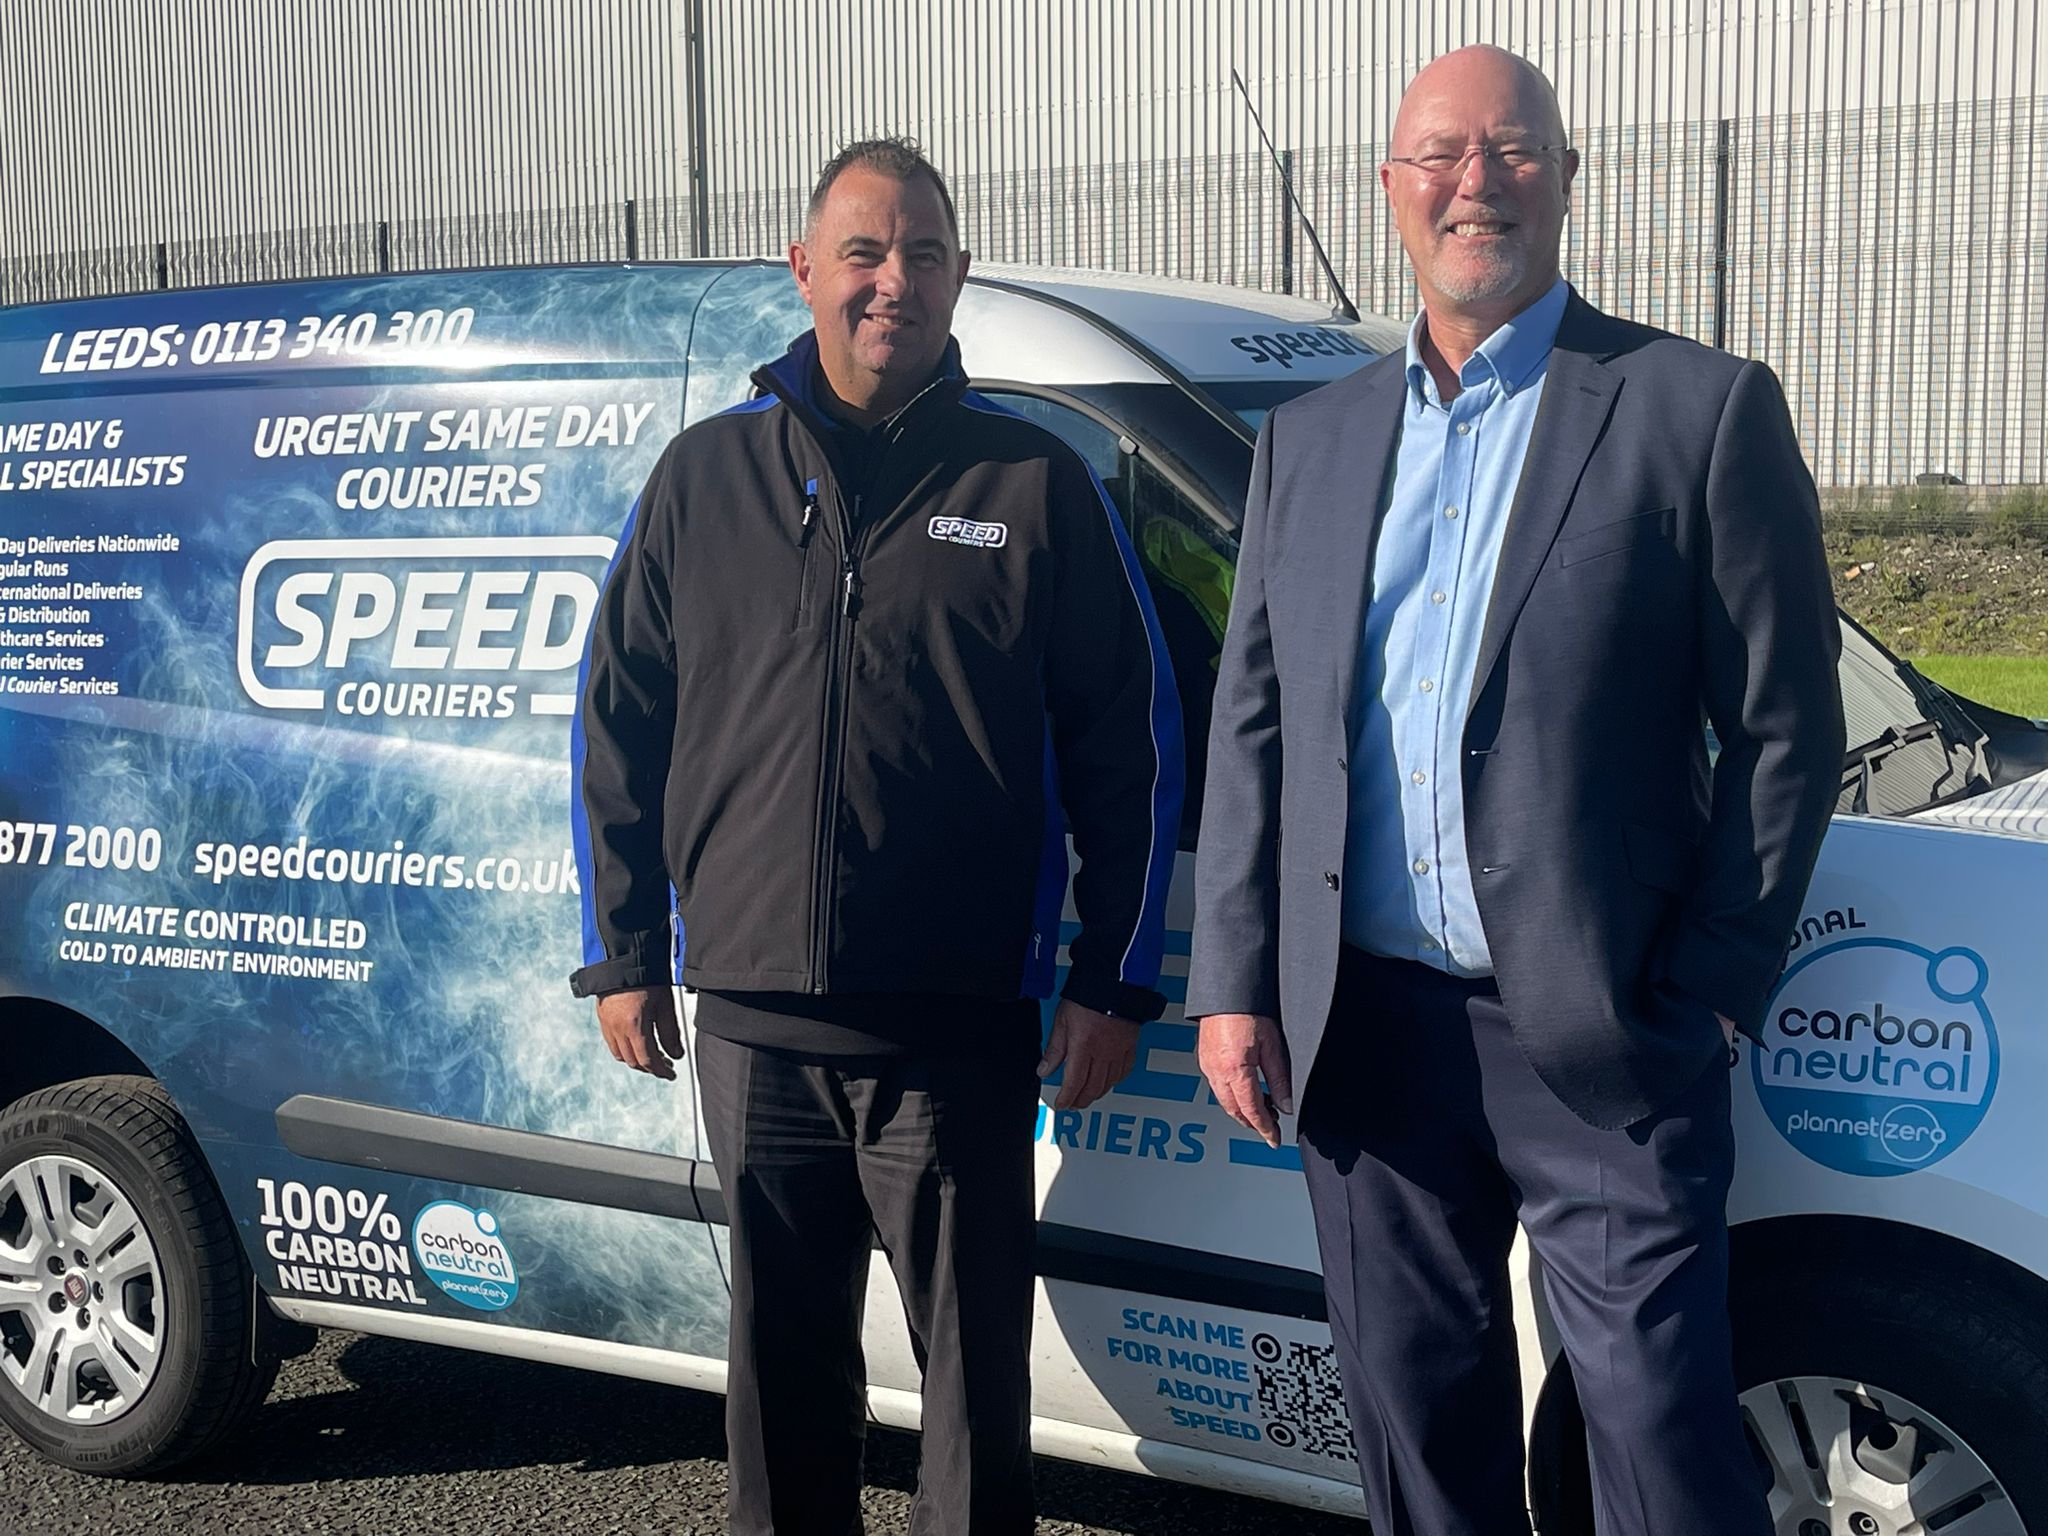 Speed Couriers acquires Glasgow's Caledonian Couriers in Scottish expansion